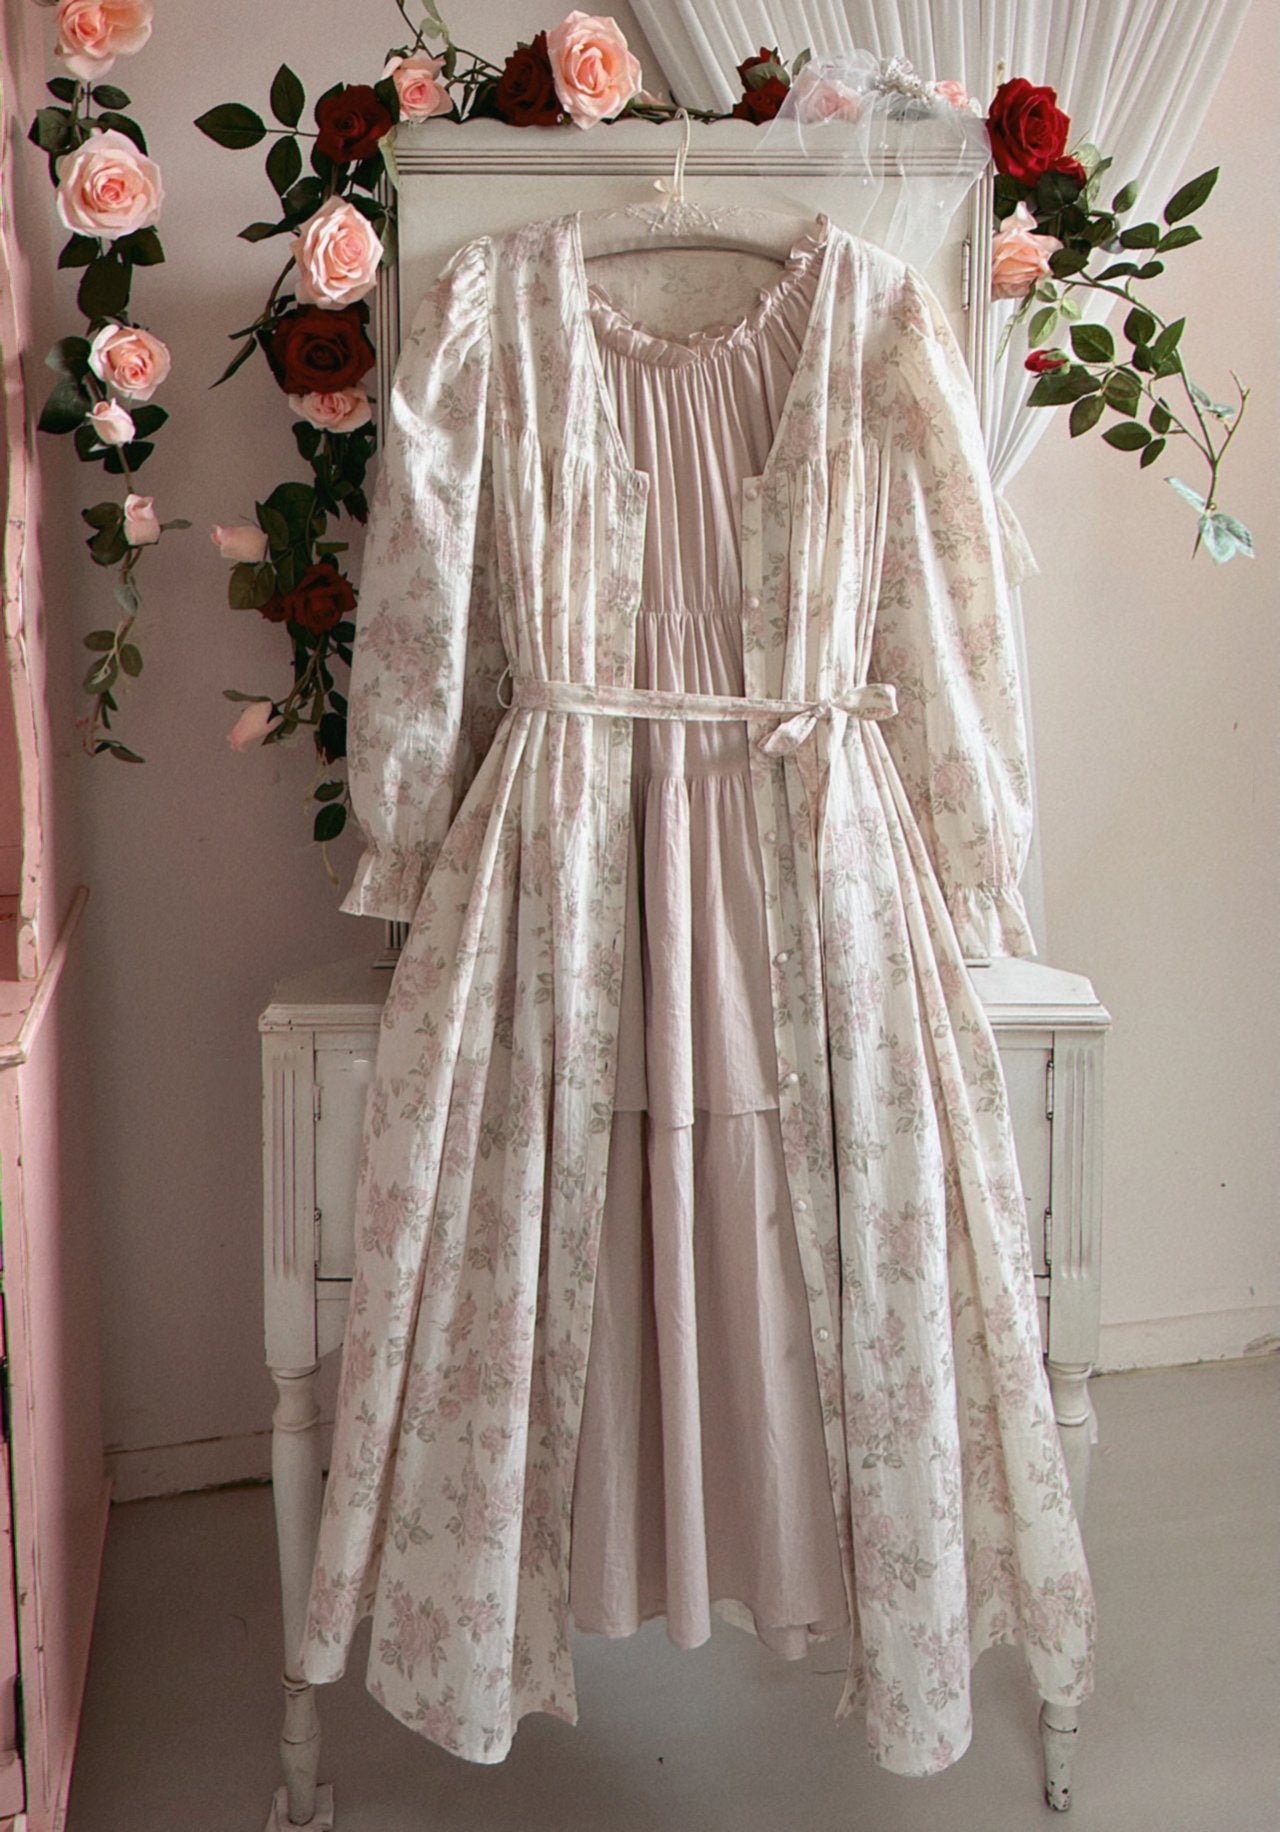 Blooming Adult Robe Dress